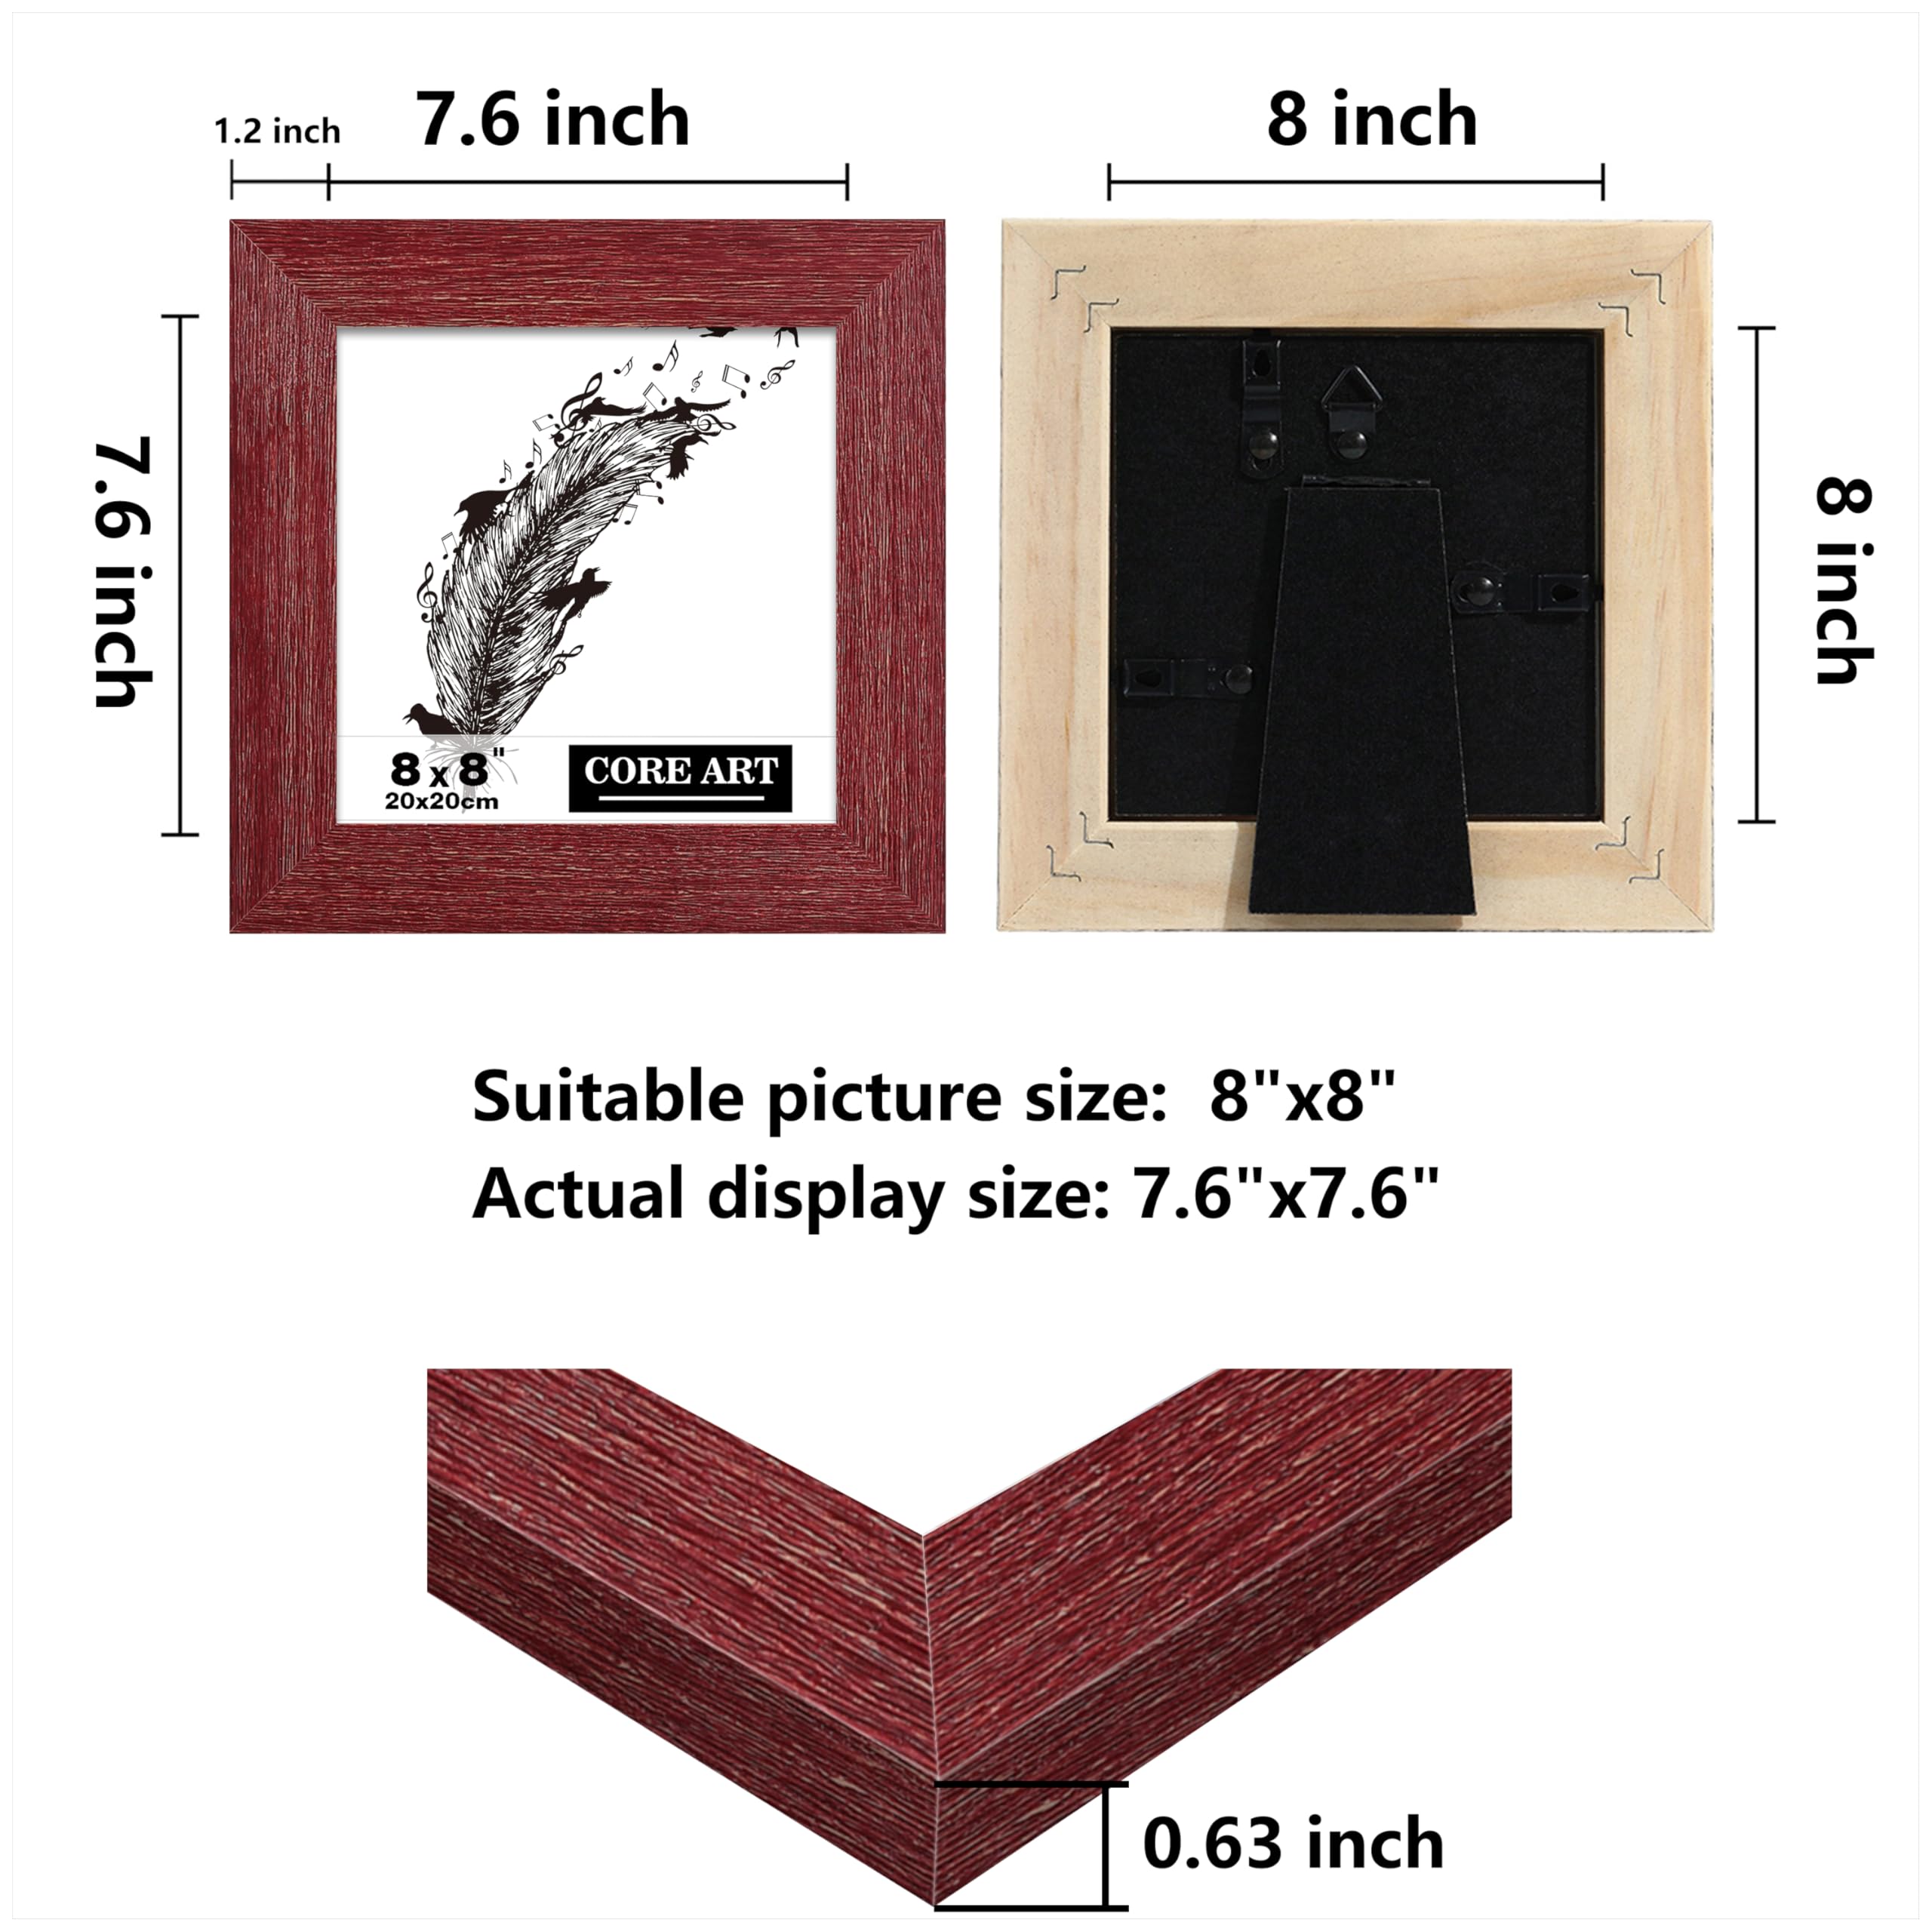 CORE ART 8x8 Picture Frame, Handmade Wood Rustic Red Photo Frame Set of 2, High Definition Semi-tempered Glass Wall or Tabletop Display